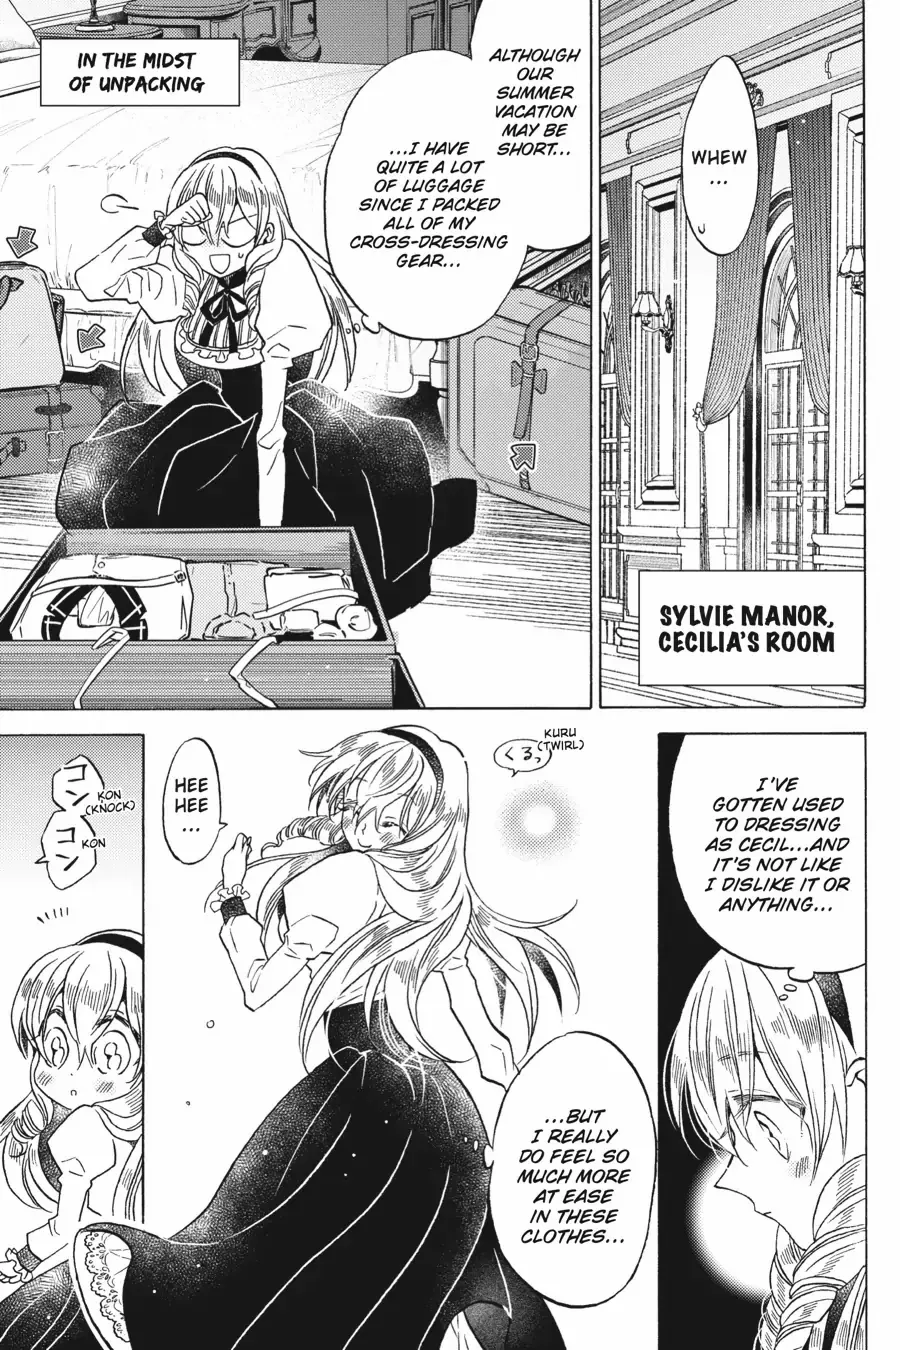 The Villainess, Cecilia Silvie, Doesn't Want To Die, So She Decided To Cross-Dress! Chapter 14 #3